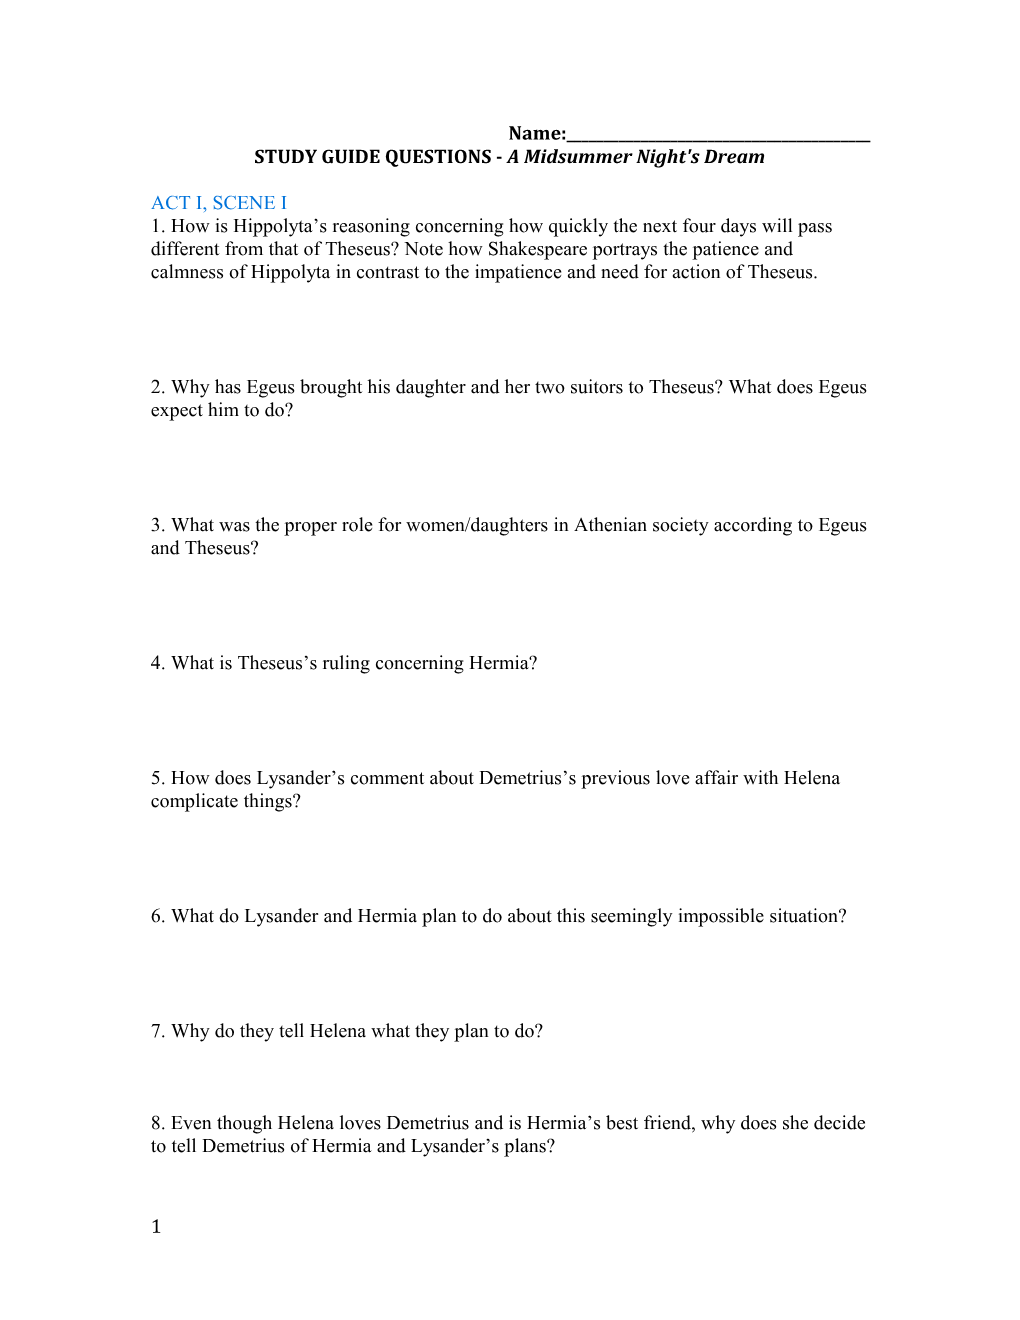 STUDY GUIDE QUESTIONS - a Midsummer Night's Dream